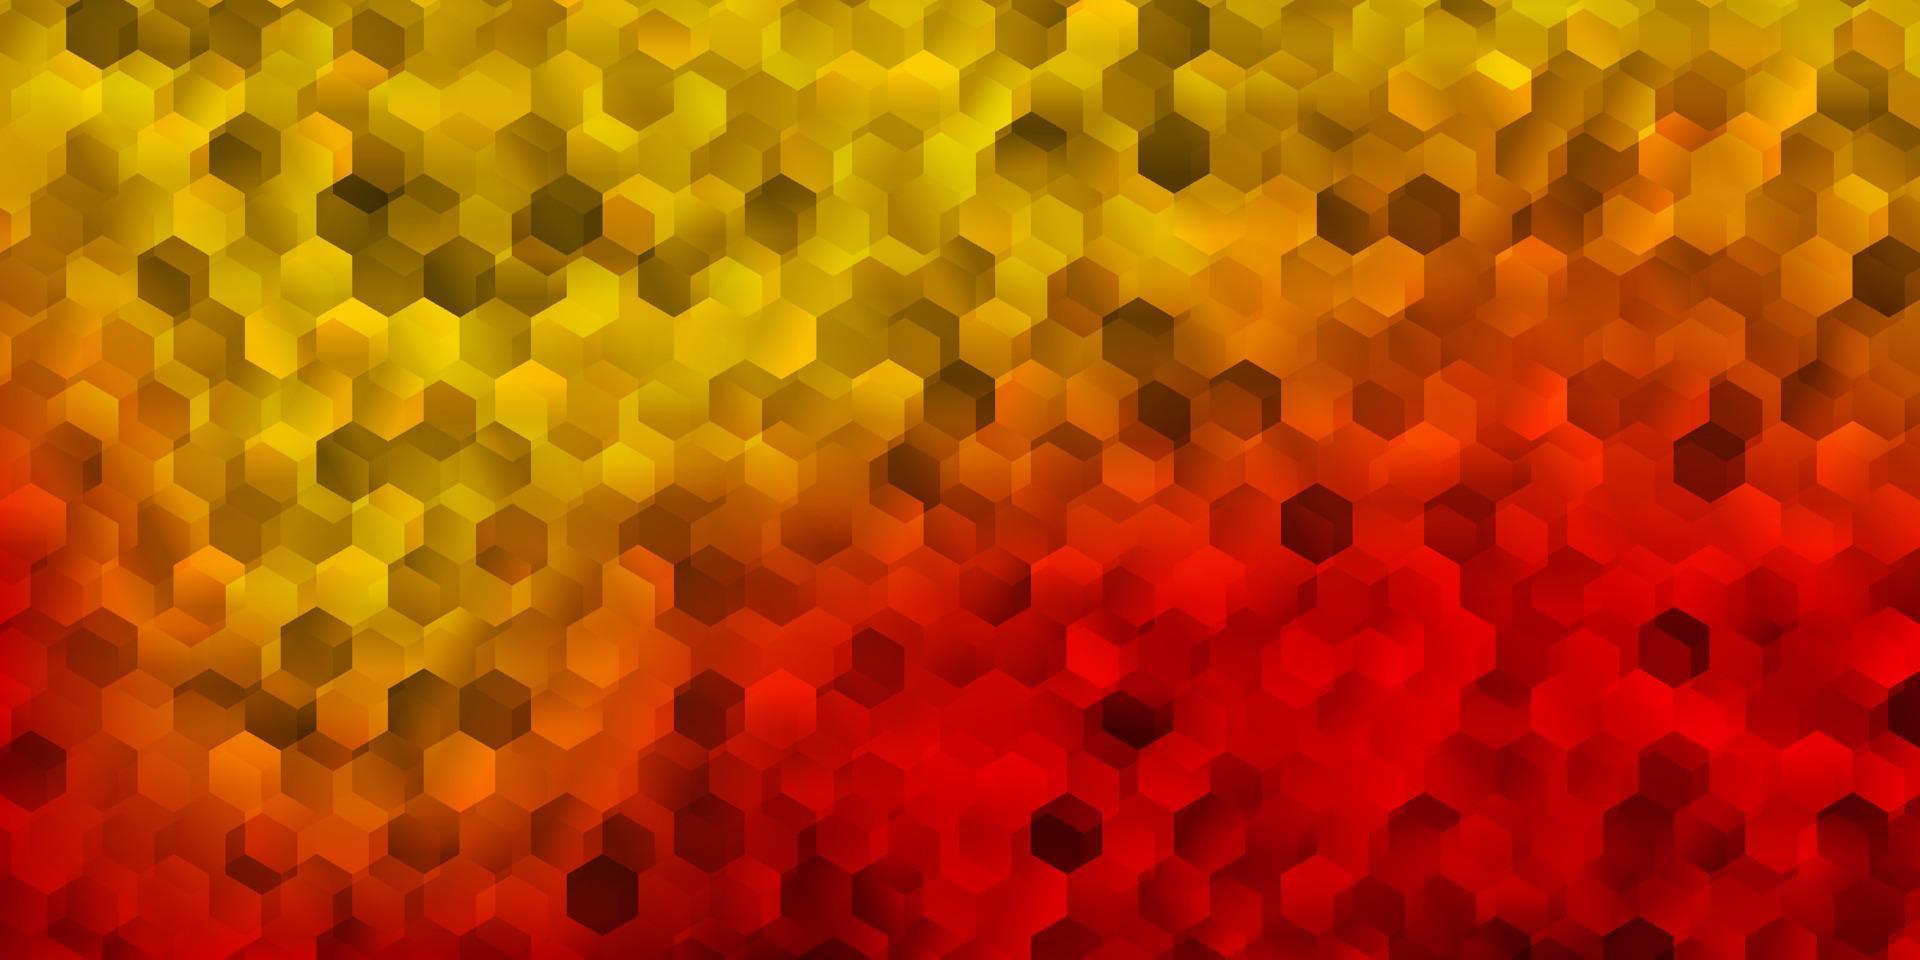 Dark red, yellow vector texture with colorful hexagons.